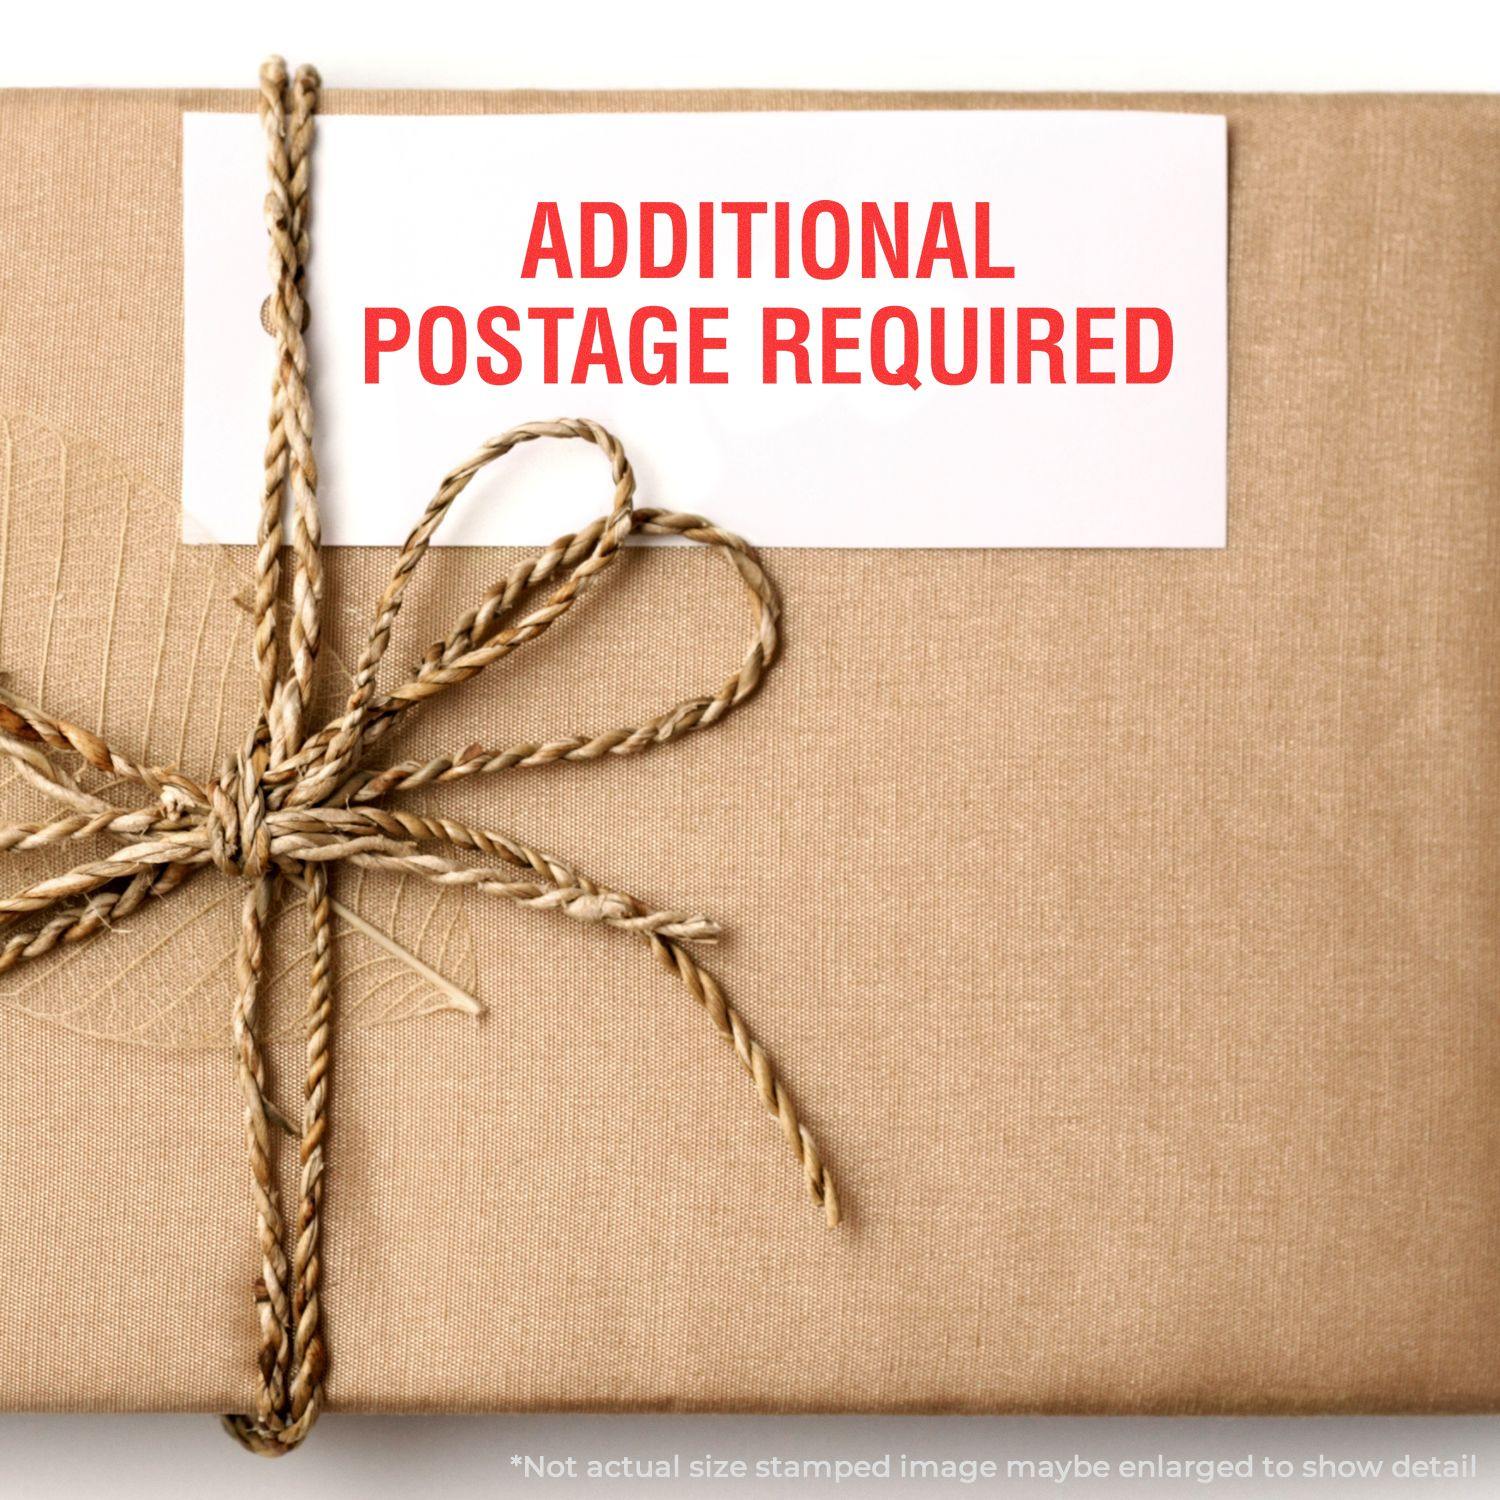 A stock office pre-inked stamp with a stamped image showing how the text "ADDITIONAL POSTAGE REQUIRED" is displayed after stamping.